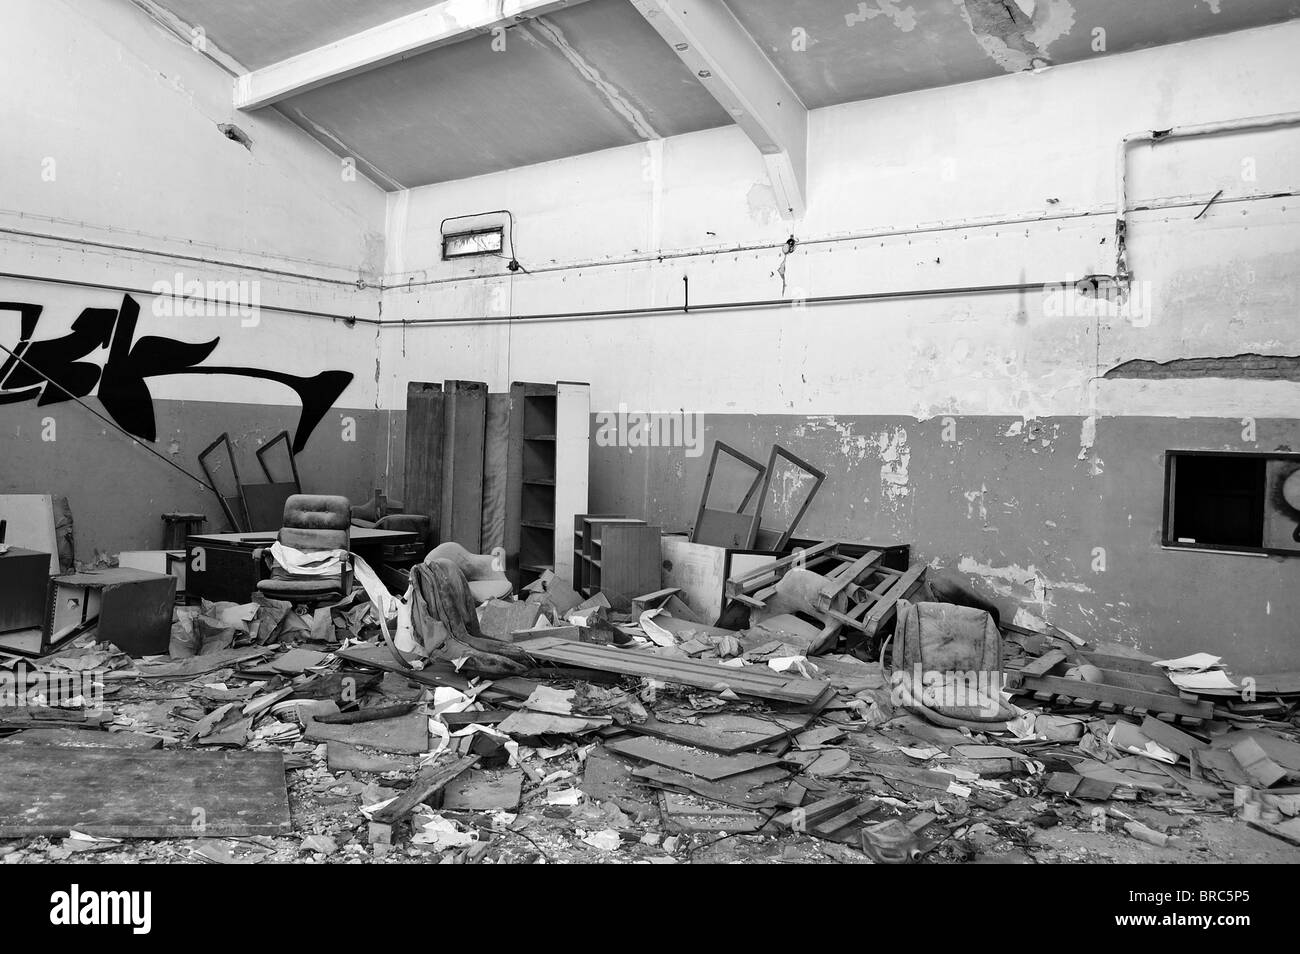 Vandalized equipment and debris in derelict factory. Black and white. Stock Photo